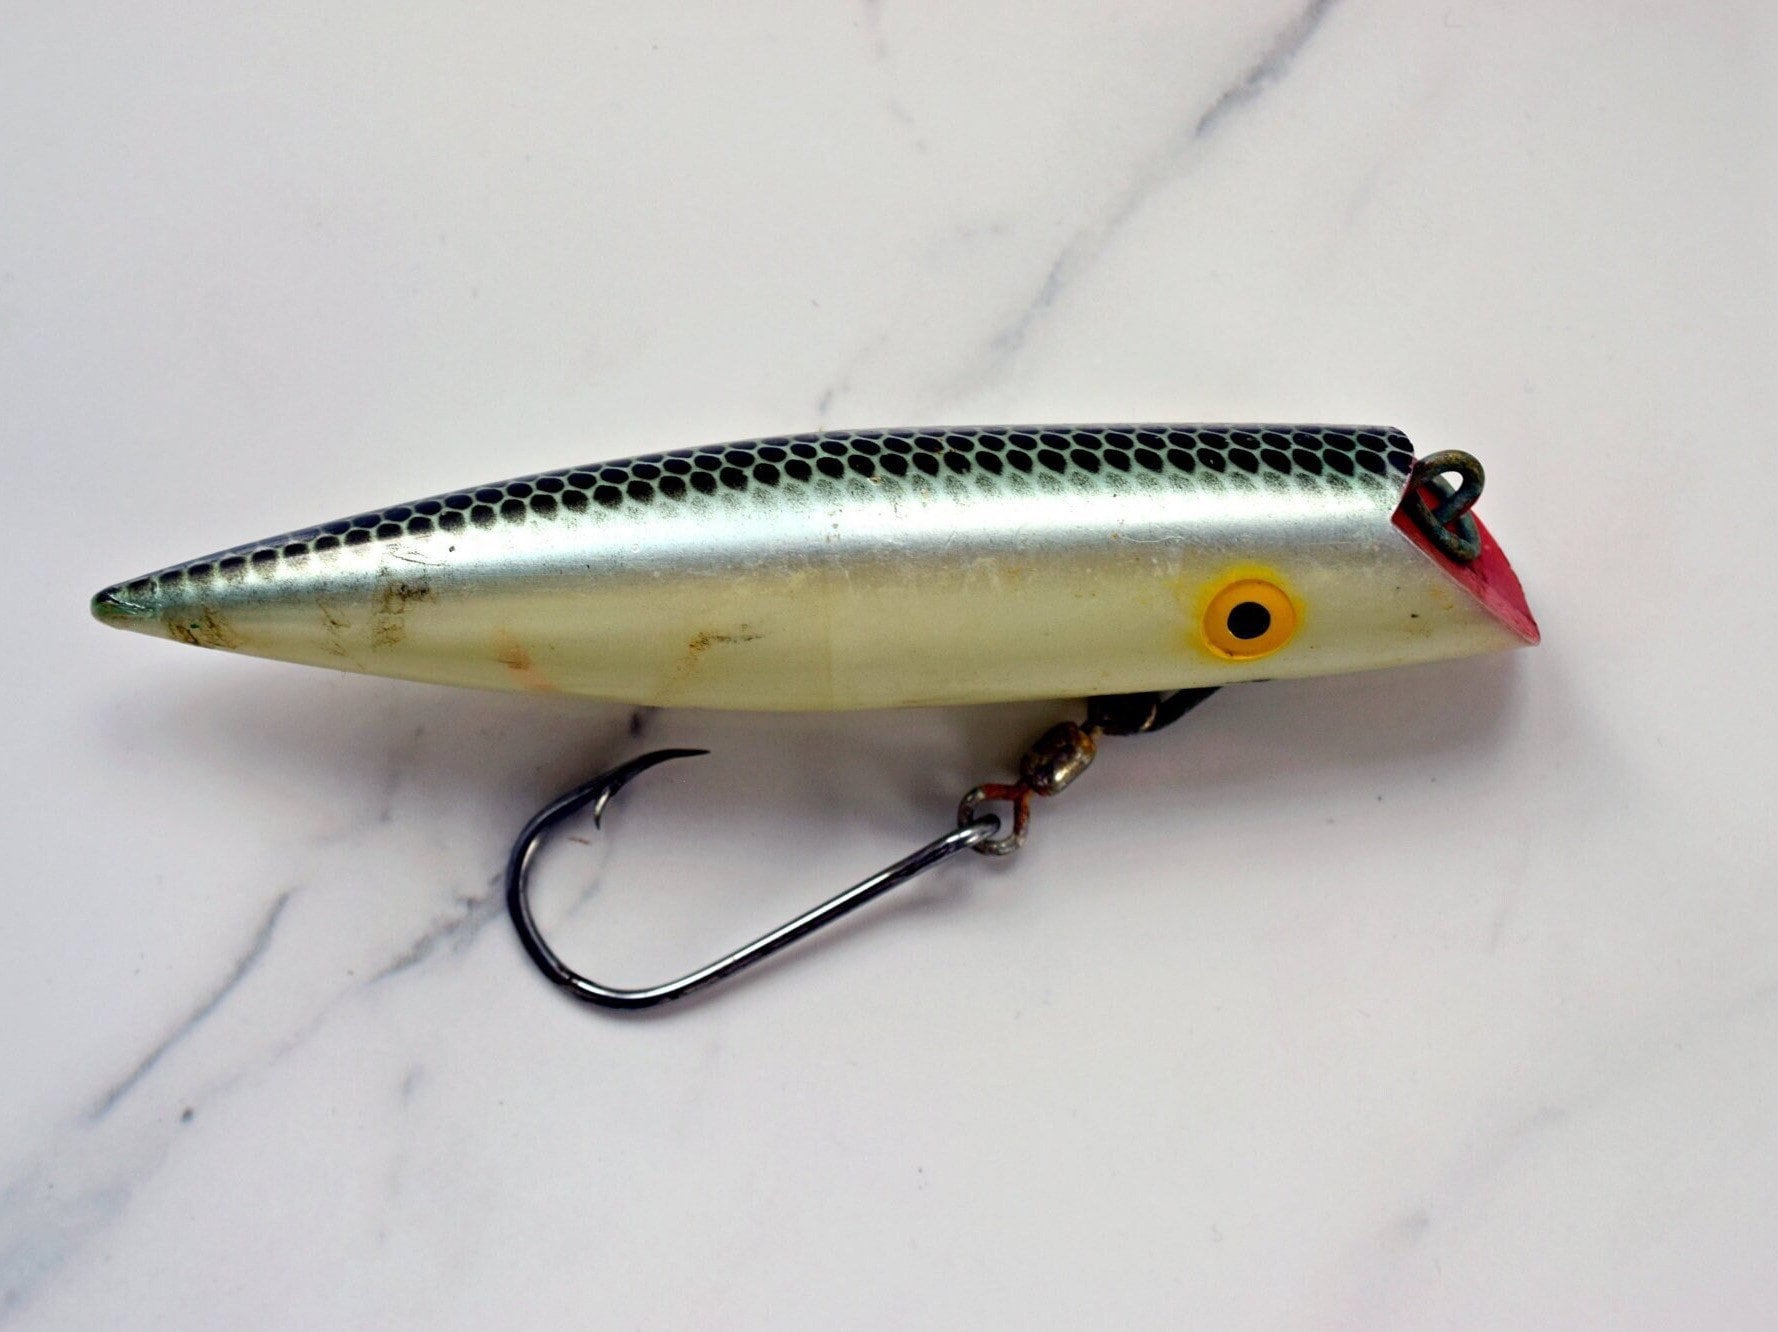 Vintage Fishing Lure 6 Salmon Plug, Old Fish Hook Around 1960s, Washington  Fish Gear for Men, Mans Cave Den, Fathers Day Gift 